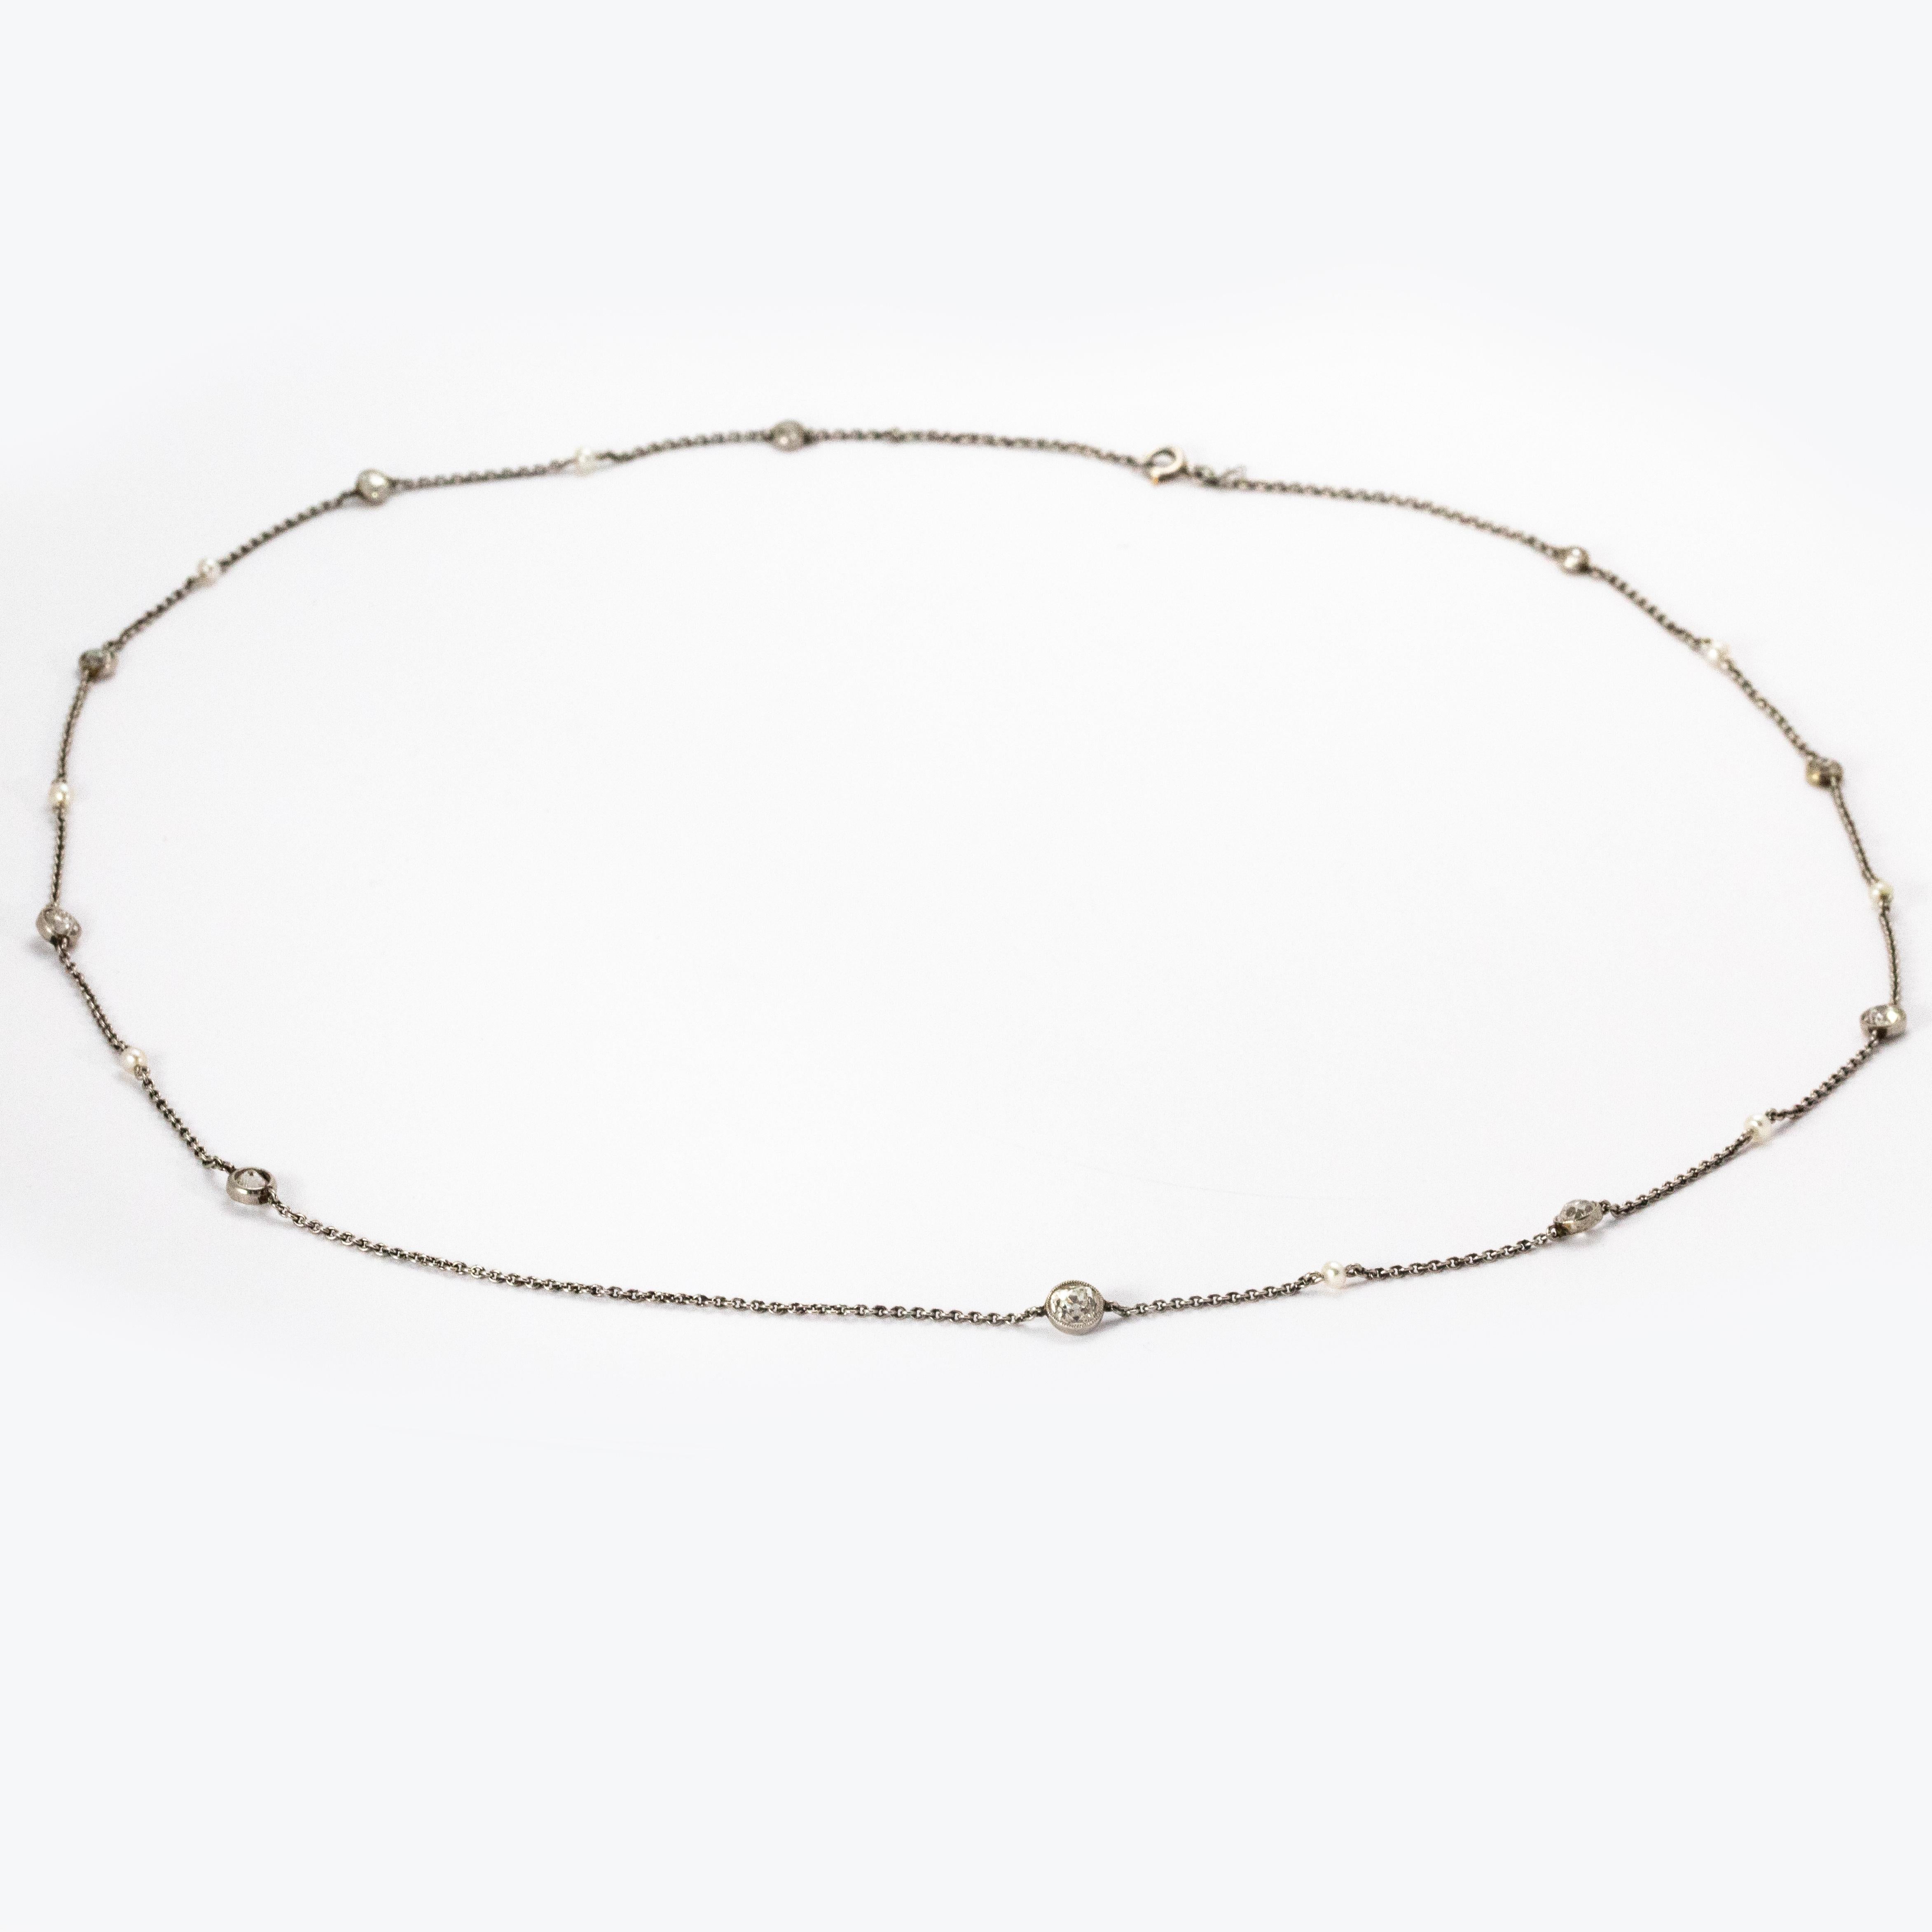 An elegant Art Deco chain necklace set with alternating diamonds and natural pearls, and modelled in platinum. This necklace boasts eight pearls and ten graduated diamonds, the largest of which weights 50 points.

Necklace Length: 22 inches